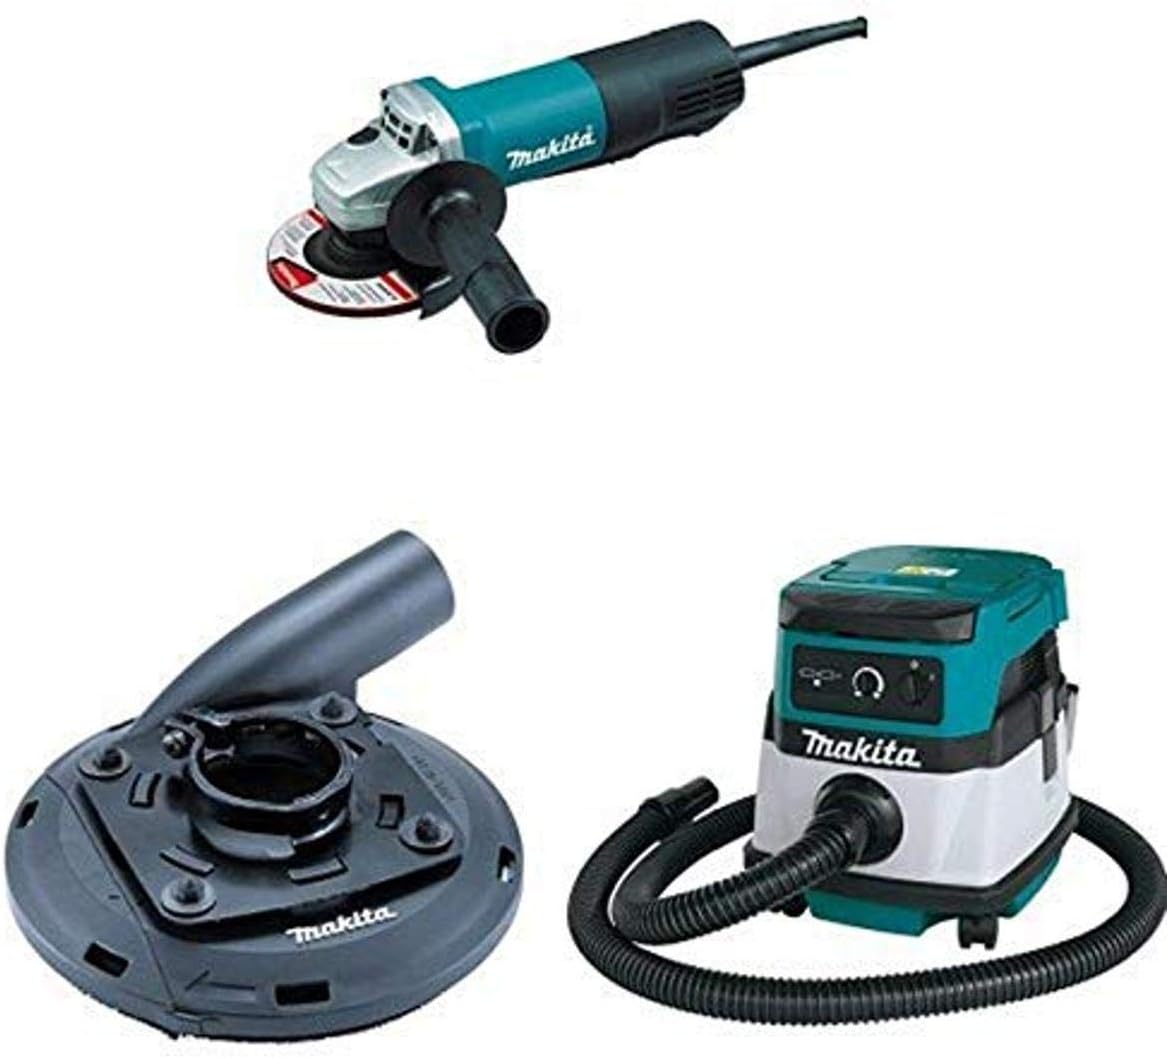 Makita 9557NB2 4-1/2-Inch Paddle Switch Angle Grinder, 195236-5 4-1/2-Inch - 5-Inch Surface Grinding Shroud,  XCV04Z 18V X2 LXT (36V) 2.1 Gallon HEPA Filter Dry Dust Extractor/Vacuum